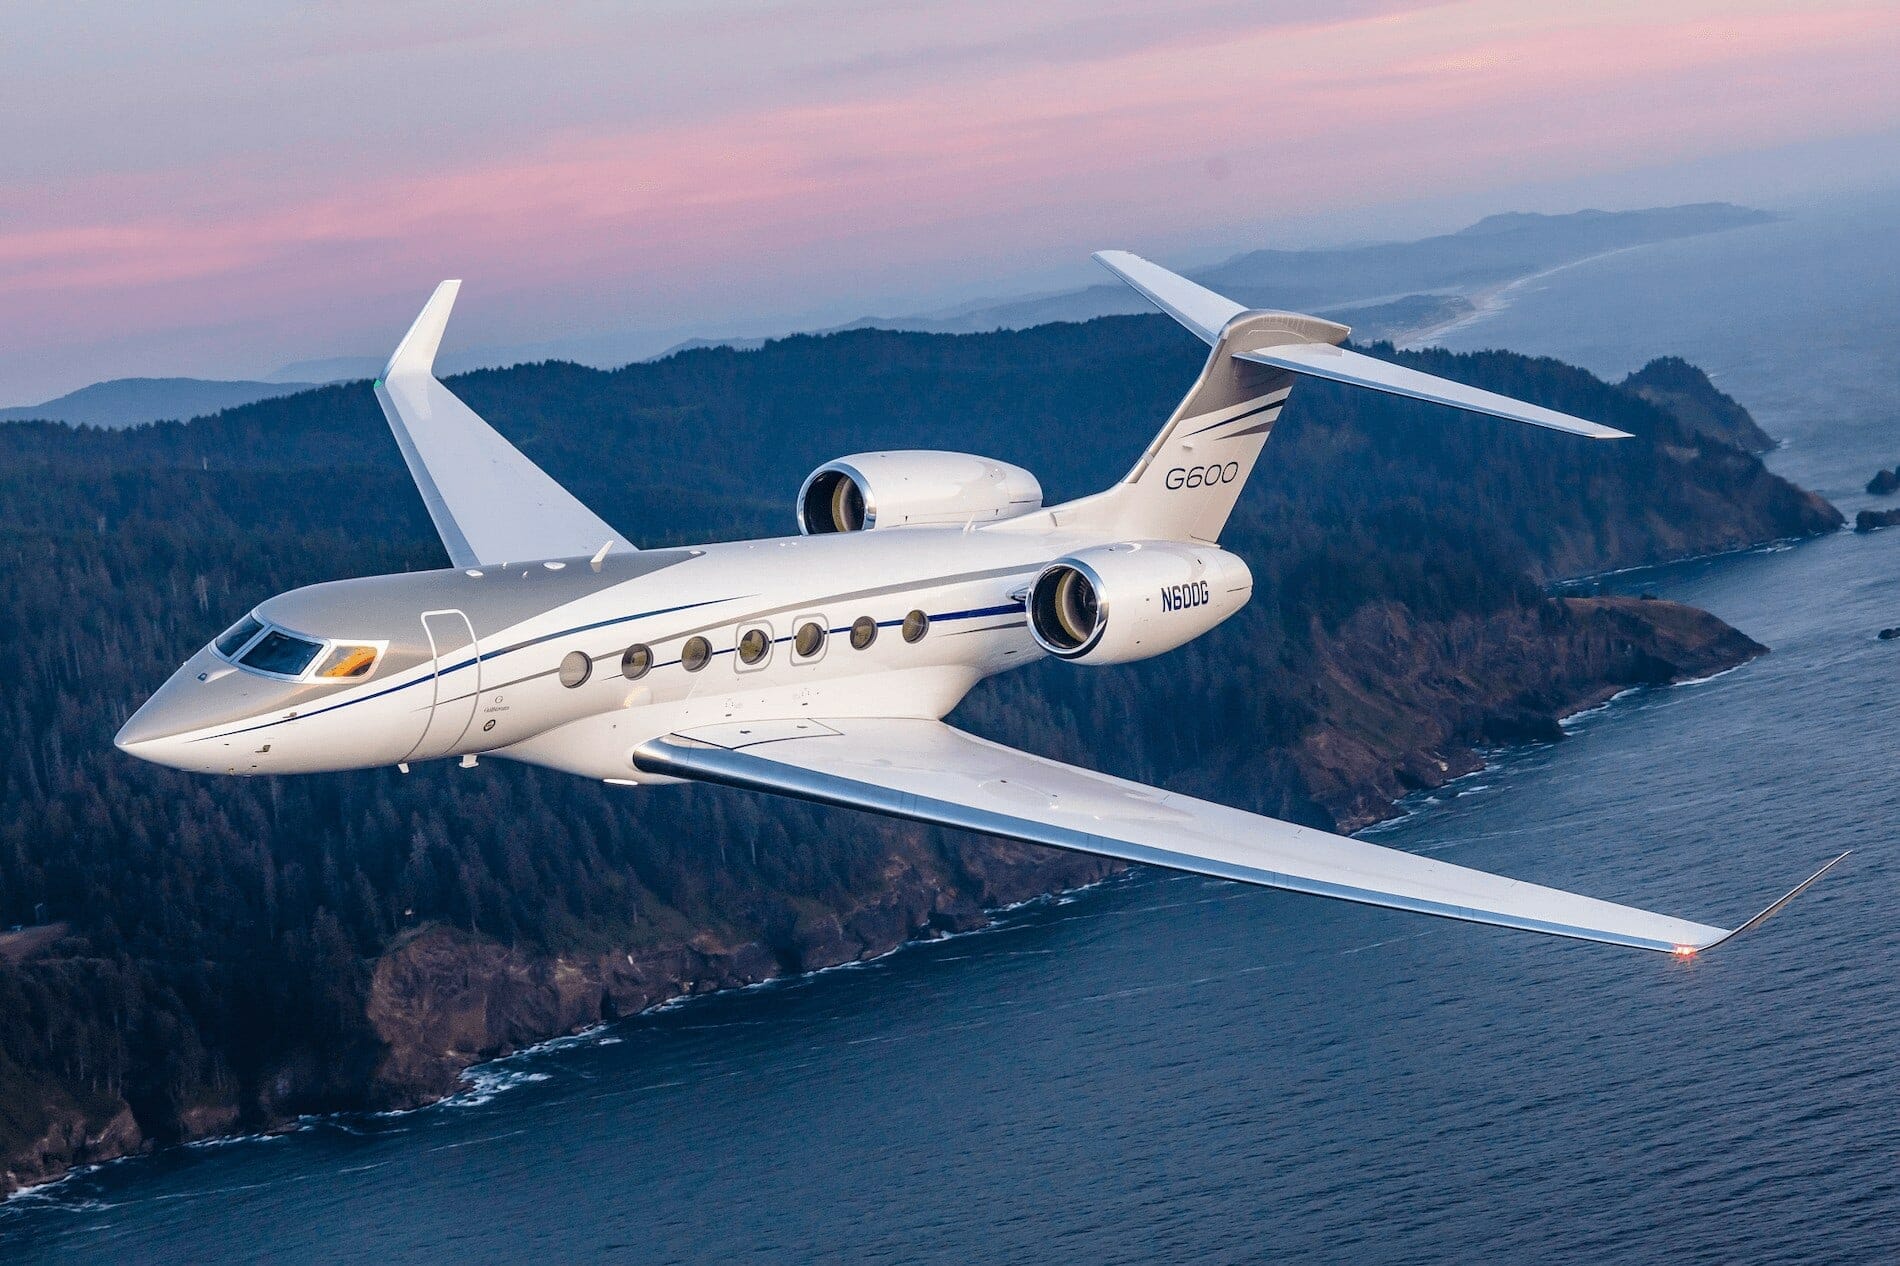 Gulfstream G600 exterior - 10th most expensive private jet in production